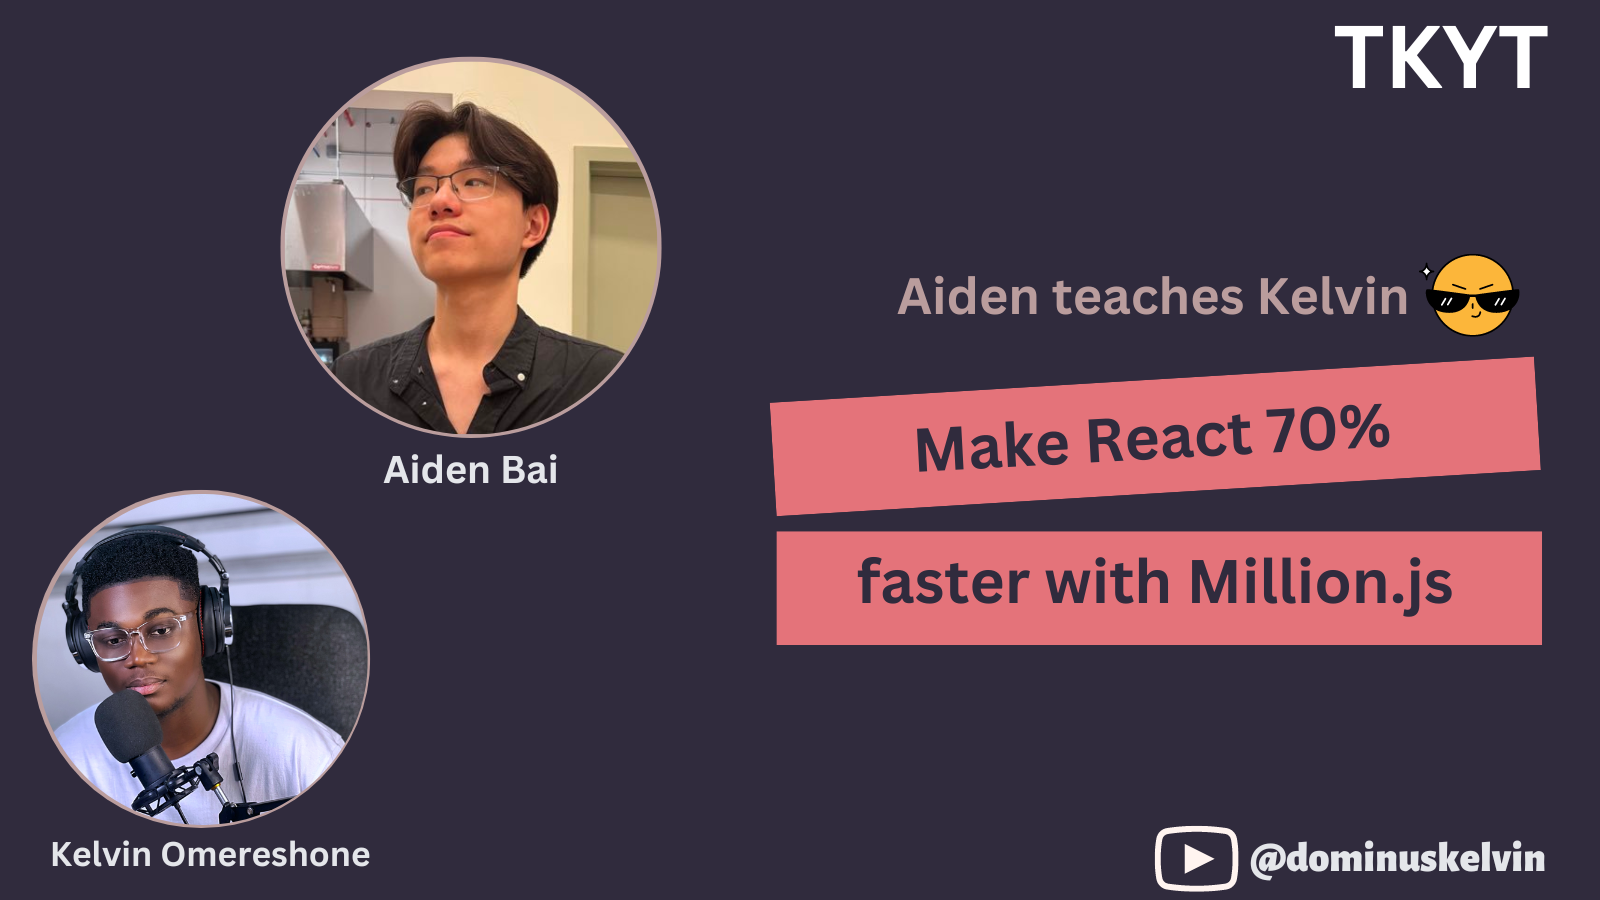 Make React 70% faster with Million.js